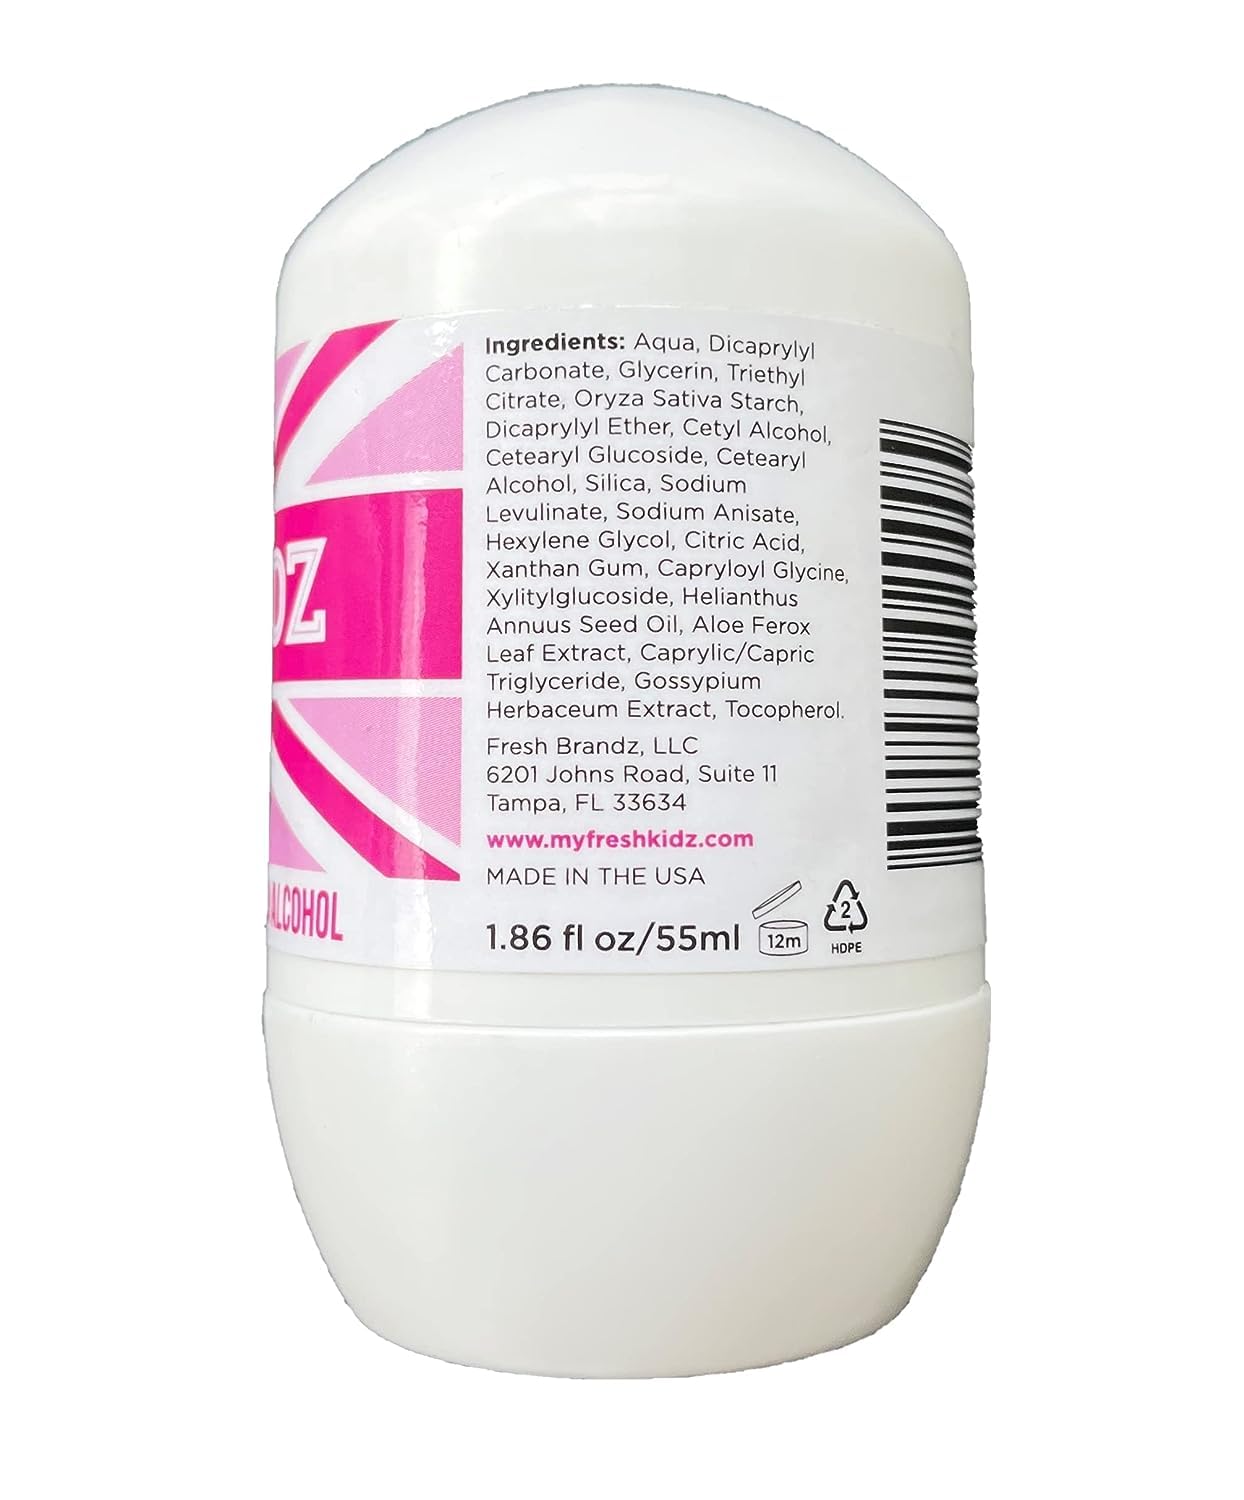 Fresh Kidz Roll On Deodorant for Kids and Teens - Baking Soda and Aluminum-free 24 Hour Protection for Sensitive Skin - Girls "Pink" 1.86 fl. oz. - image 4 of 4